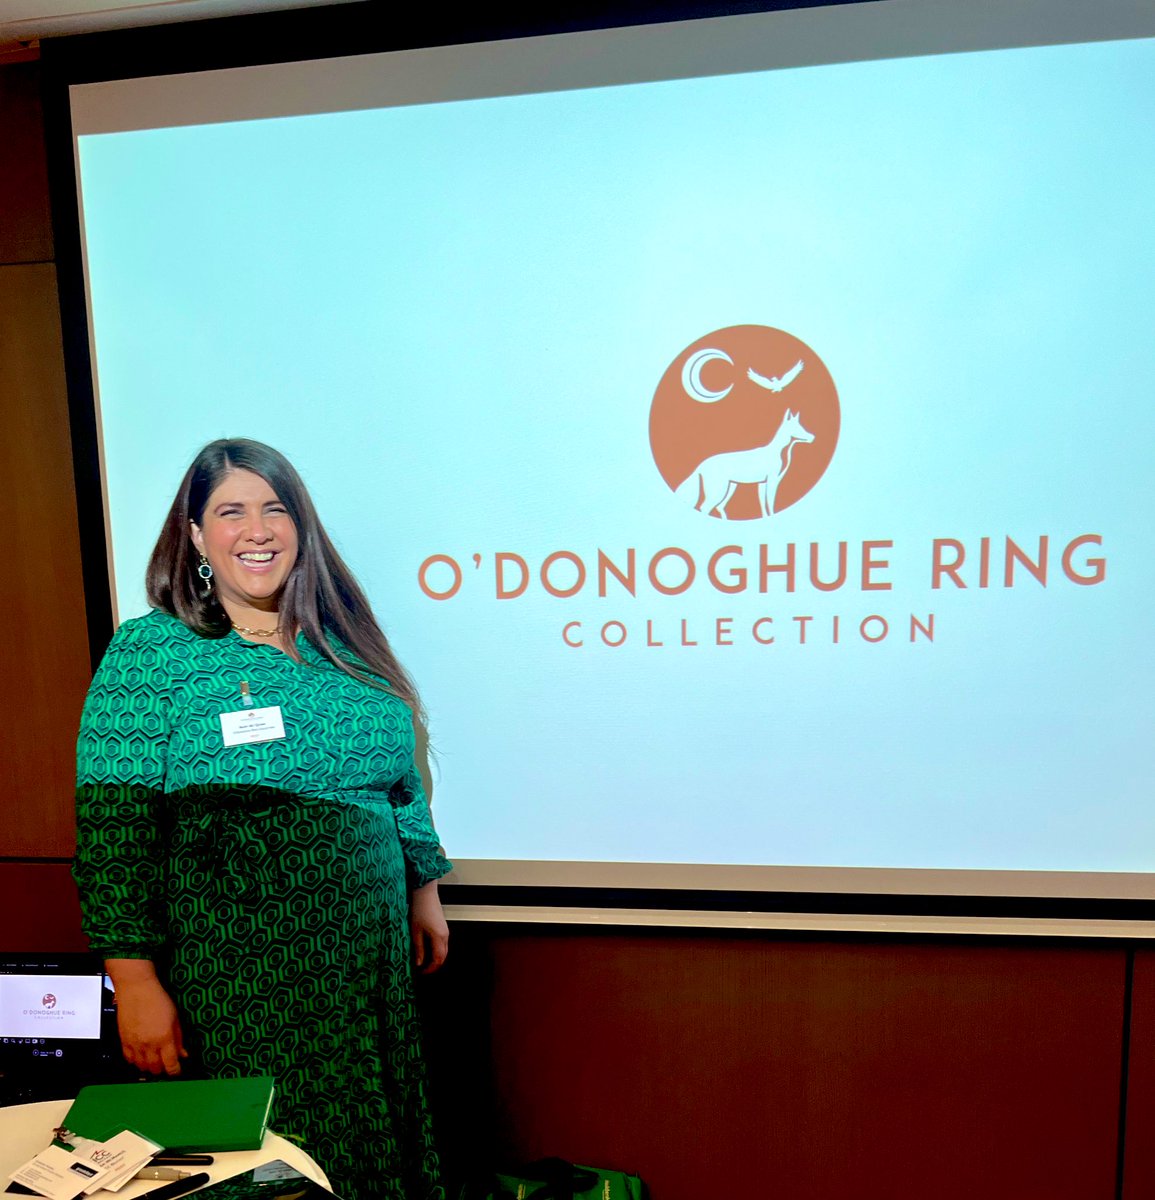 Great event in Manchester today with @MouldenMktg & industry colleagues from across Ireland in advance of #StPatricksDay delighted to represent @ODRKillarney & have the opportunity to meet new connections & showcase all that #Killarney & #Kerry has to offer. #MeetInKerry ☘️🇮🇪💚💛